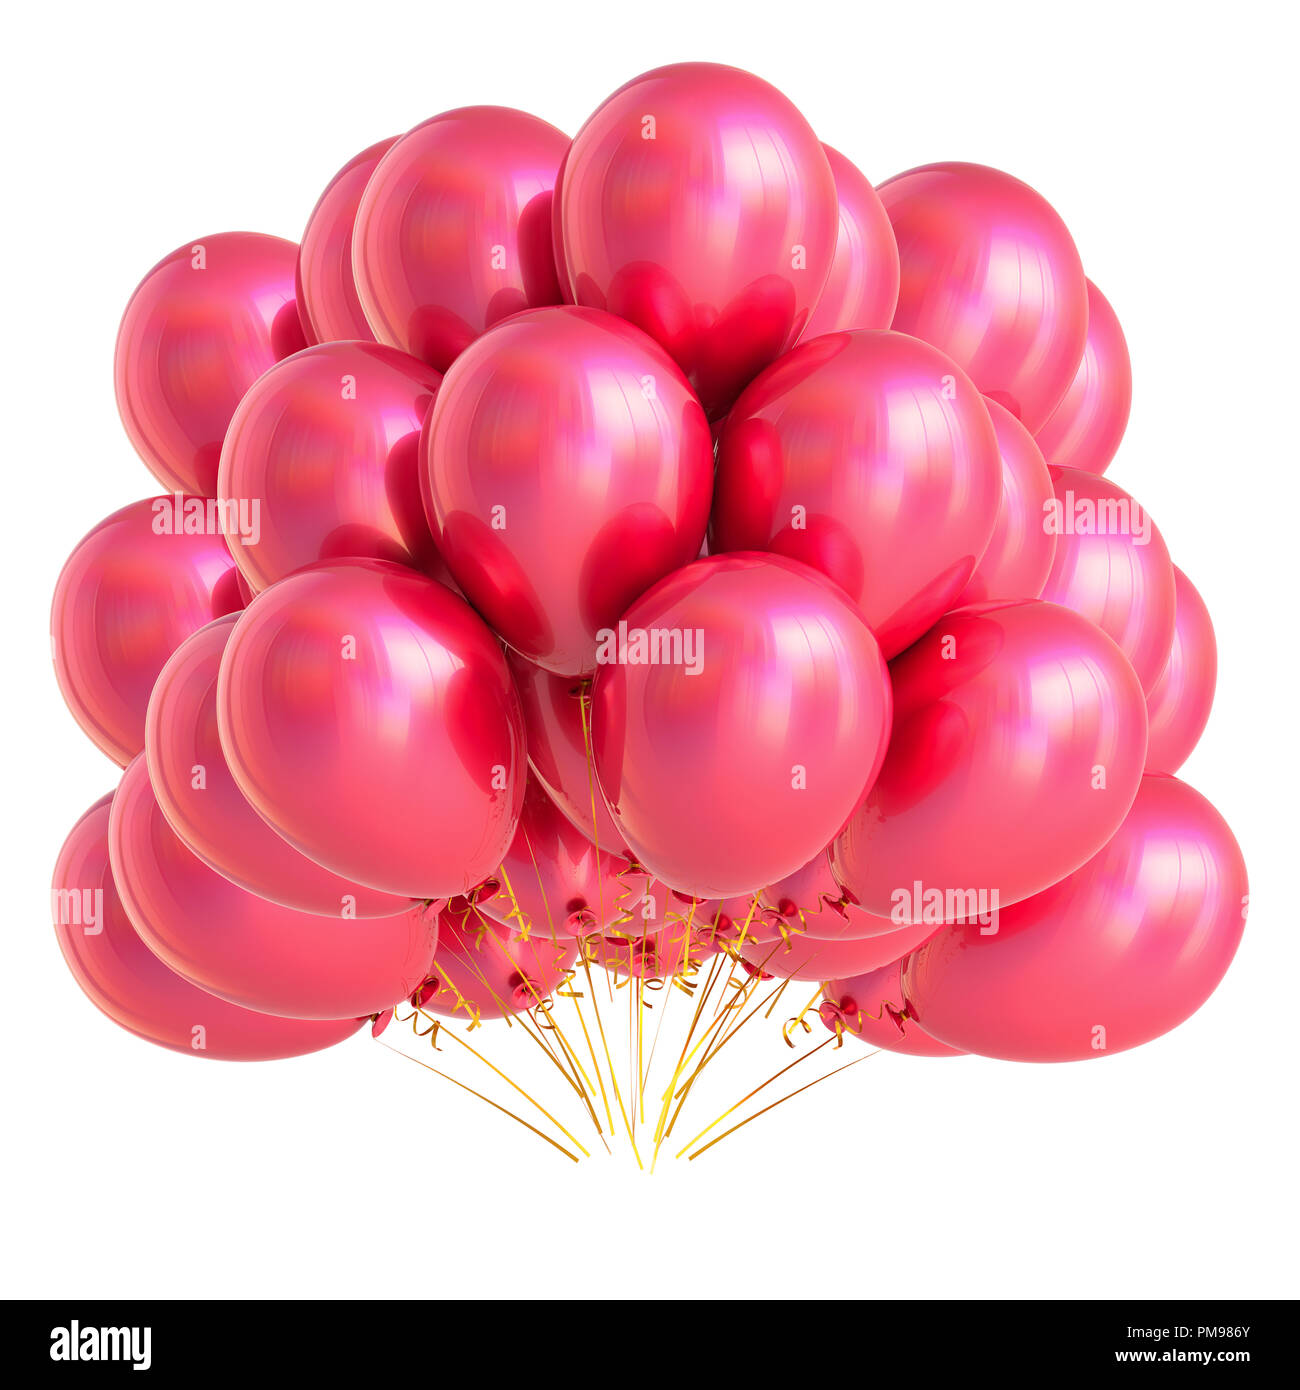 modern balloons bunch pink red. happy birthday, anniversary, party ...